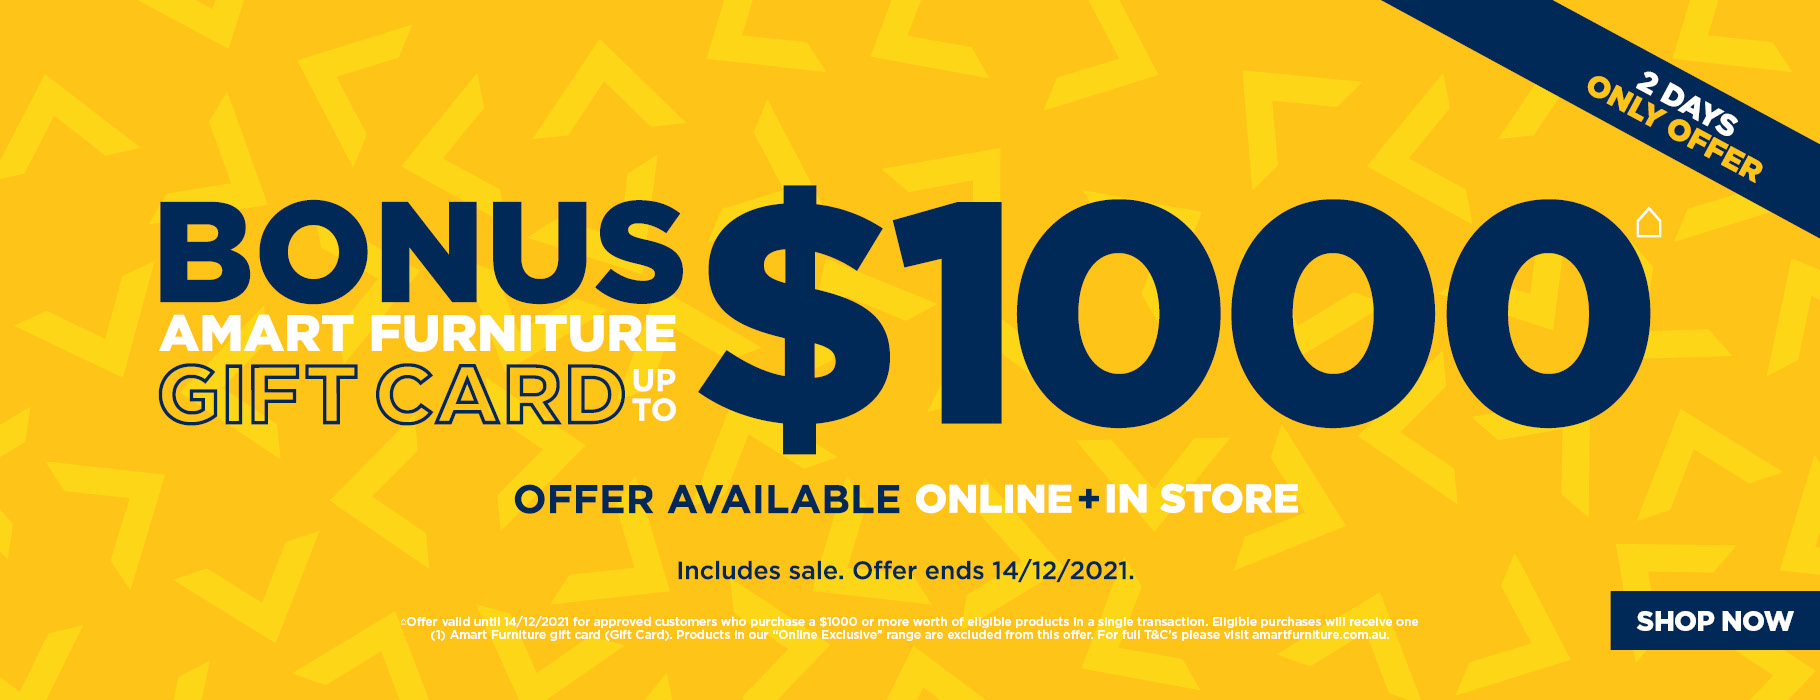 Bonus up to $1000 gift card on eligible purchases including sale items(min. spend $1000)